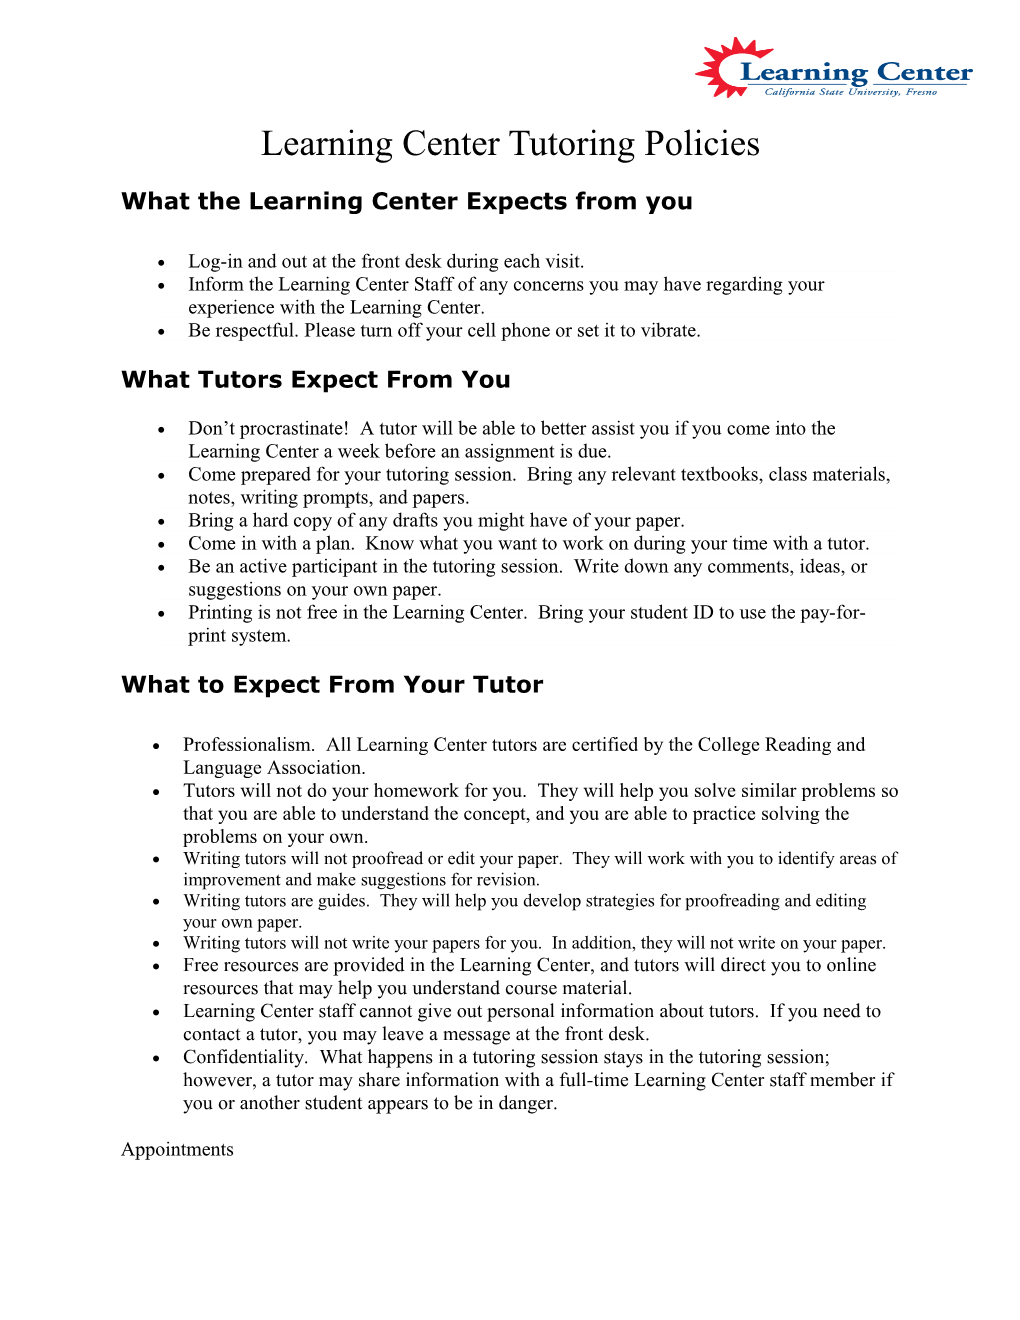 Learning Center Tutoring Policies